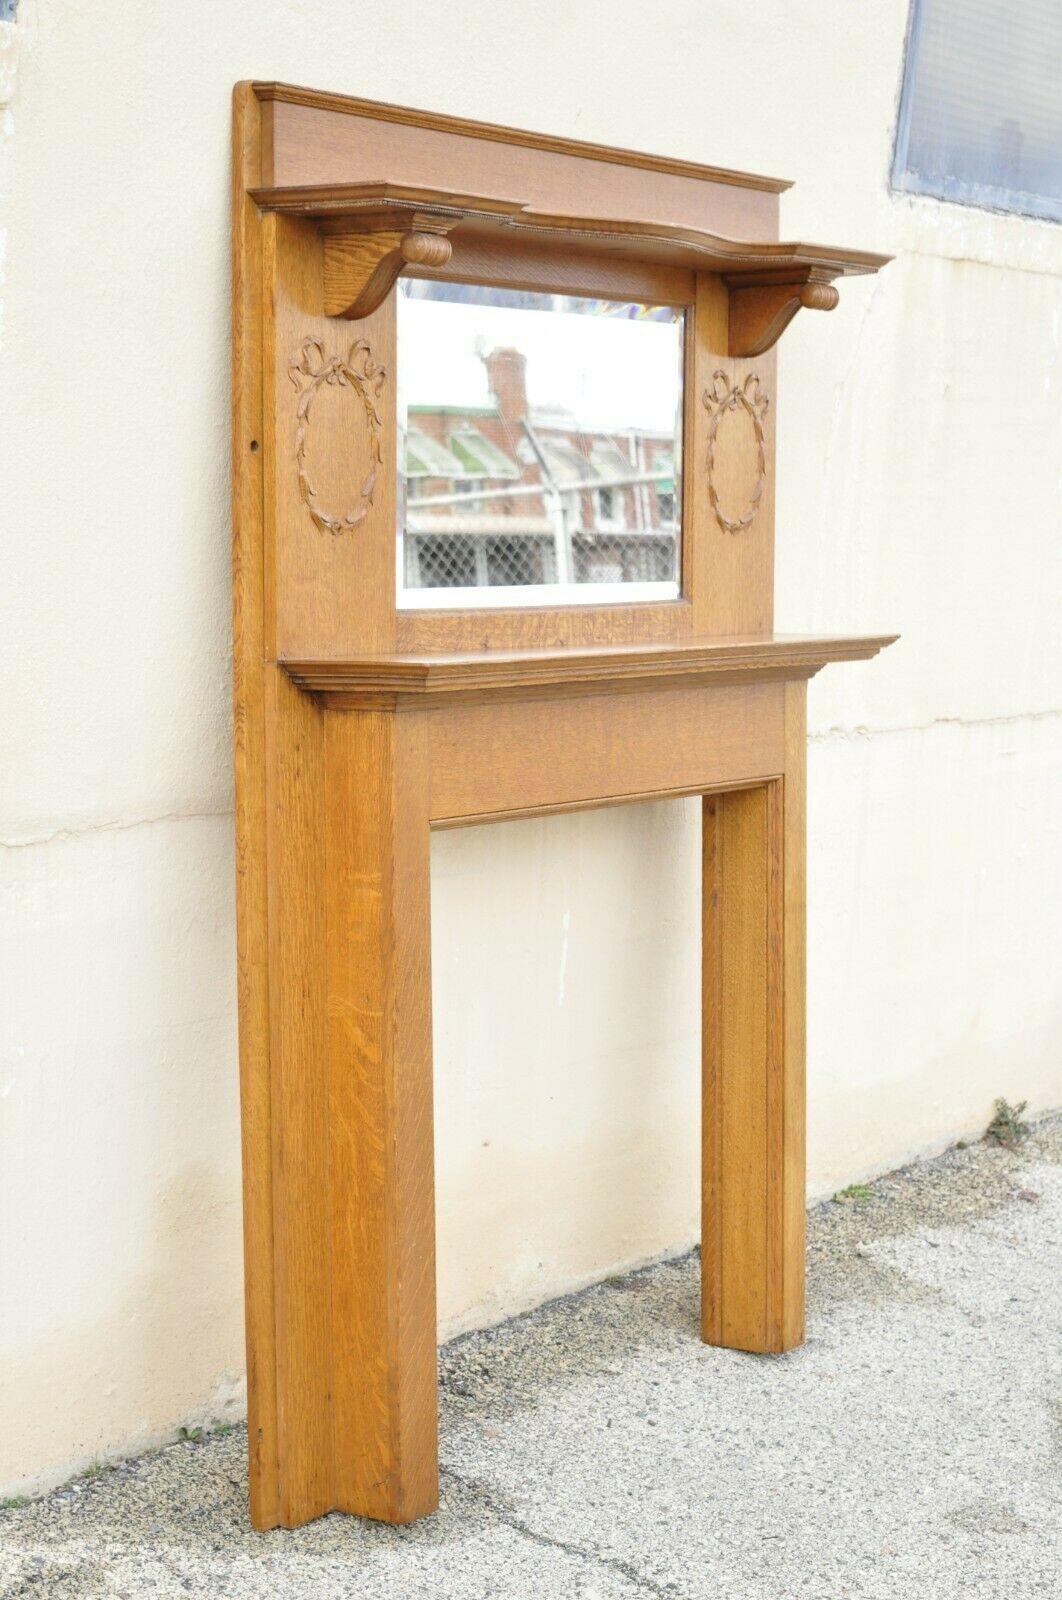 Antique American Victorian golden oak wood fireplace mantel with beveled mirror. Item features beautiful wood grain, nicely carved details, very nice antique item, quality American craftmanship, great style and form. Circa Early 1900s.